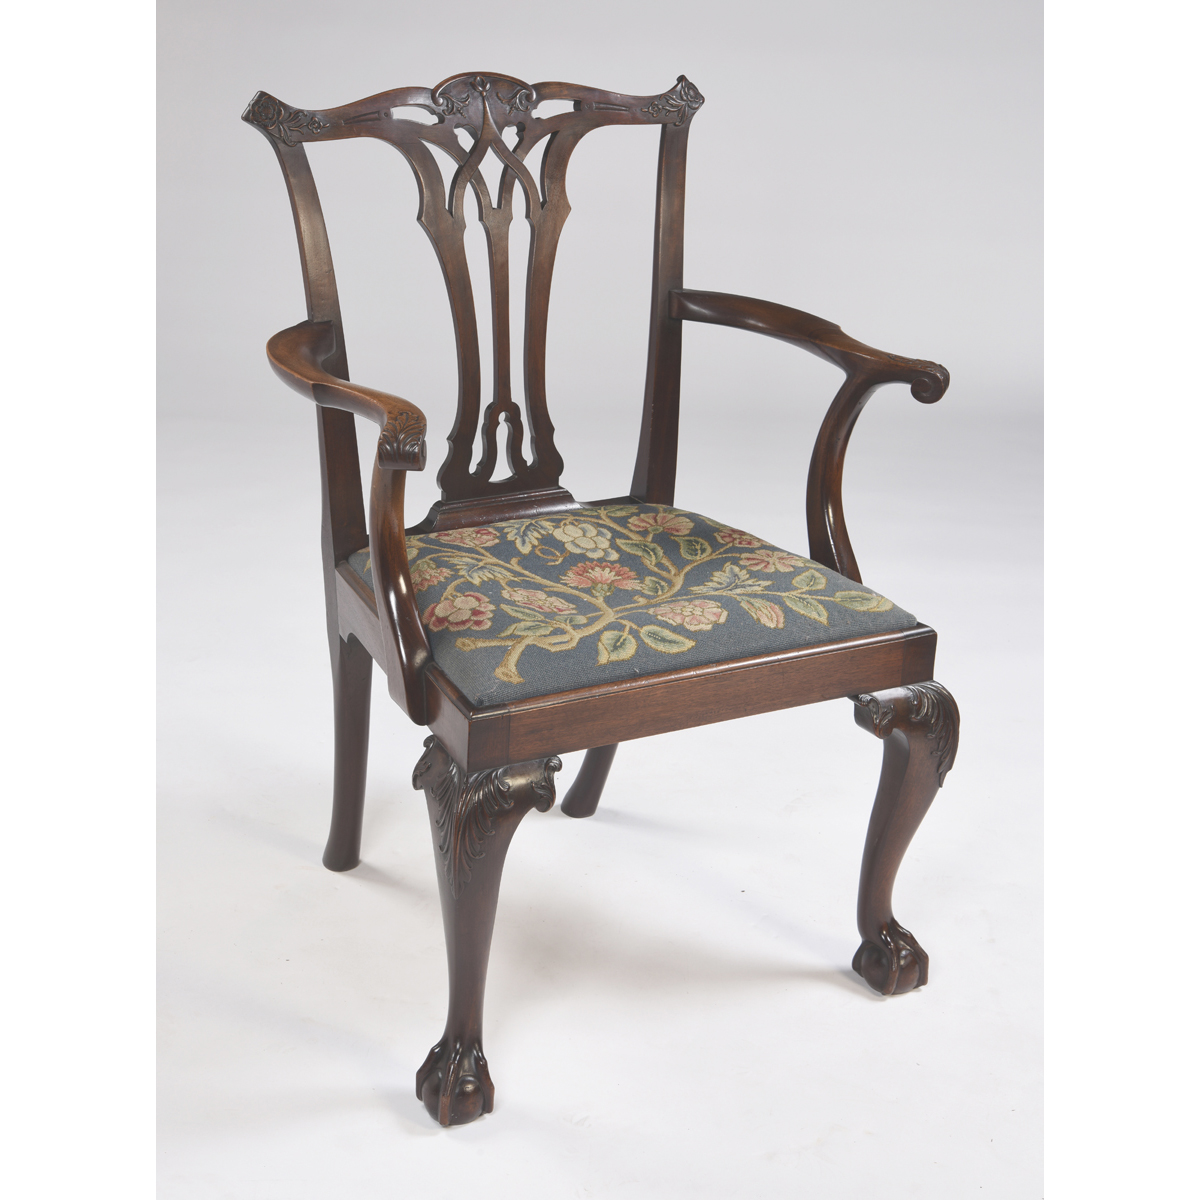 Antique English Mahogany Chippendale Style Armchair English Antiques Caledonian Inc Barrington Il 60010 847 381 0569,Japanese Food Recipes